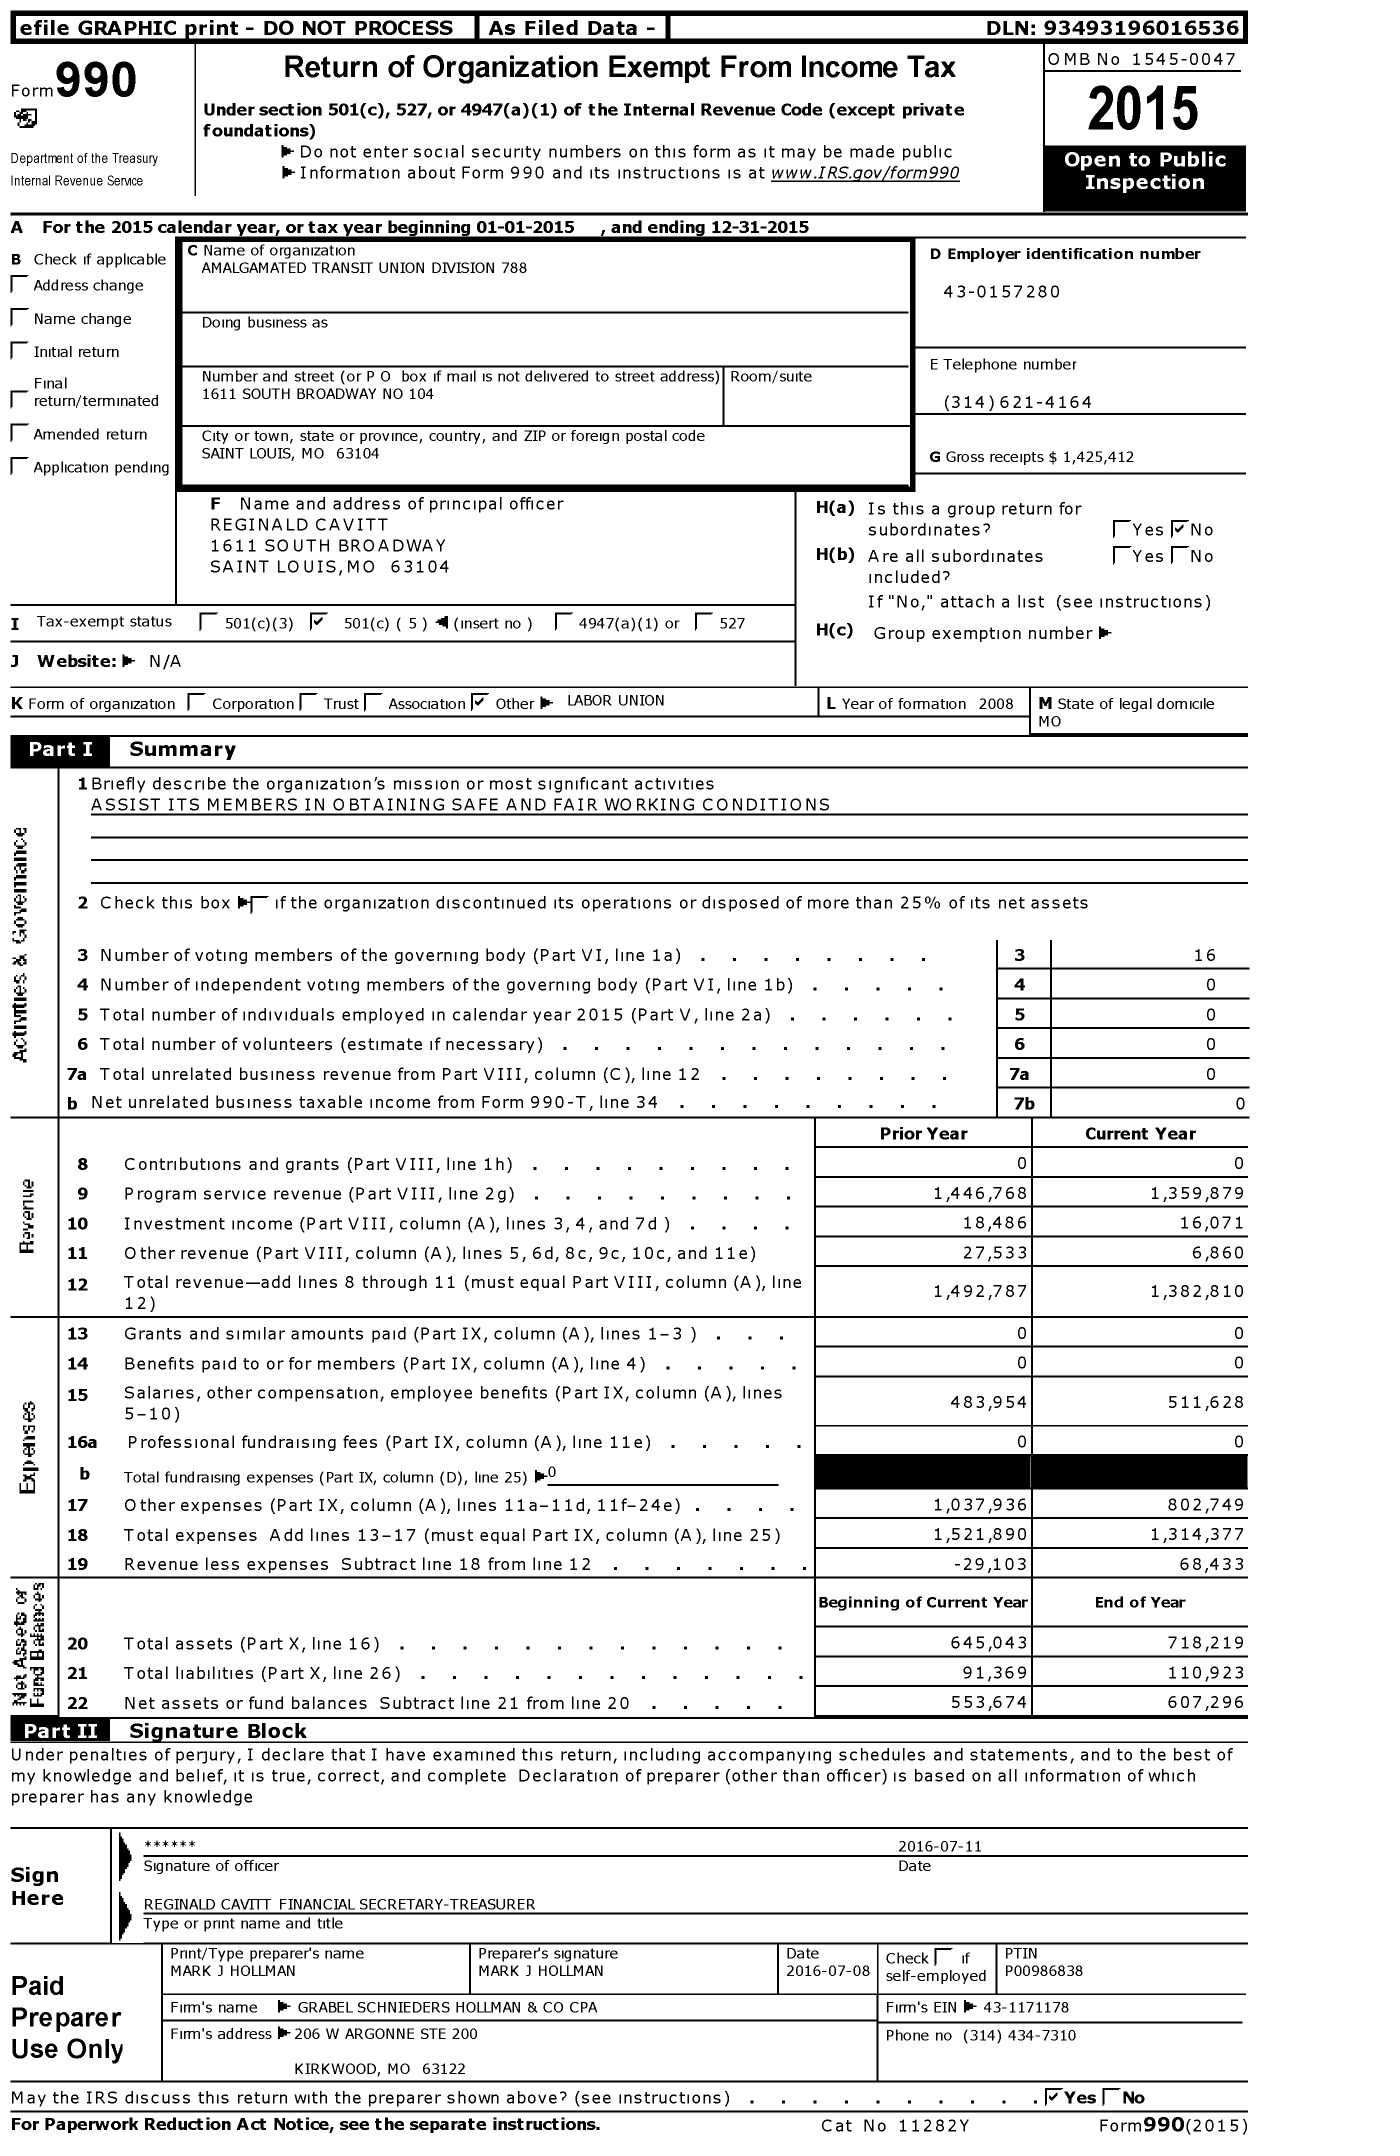 Image of first page of 2015 Form 990O for Amalgamated Transit Union Division 788